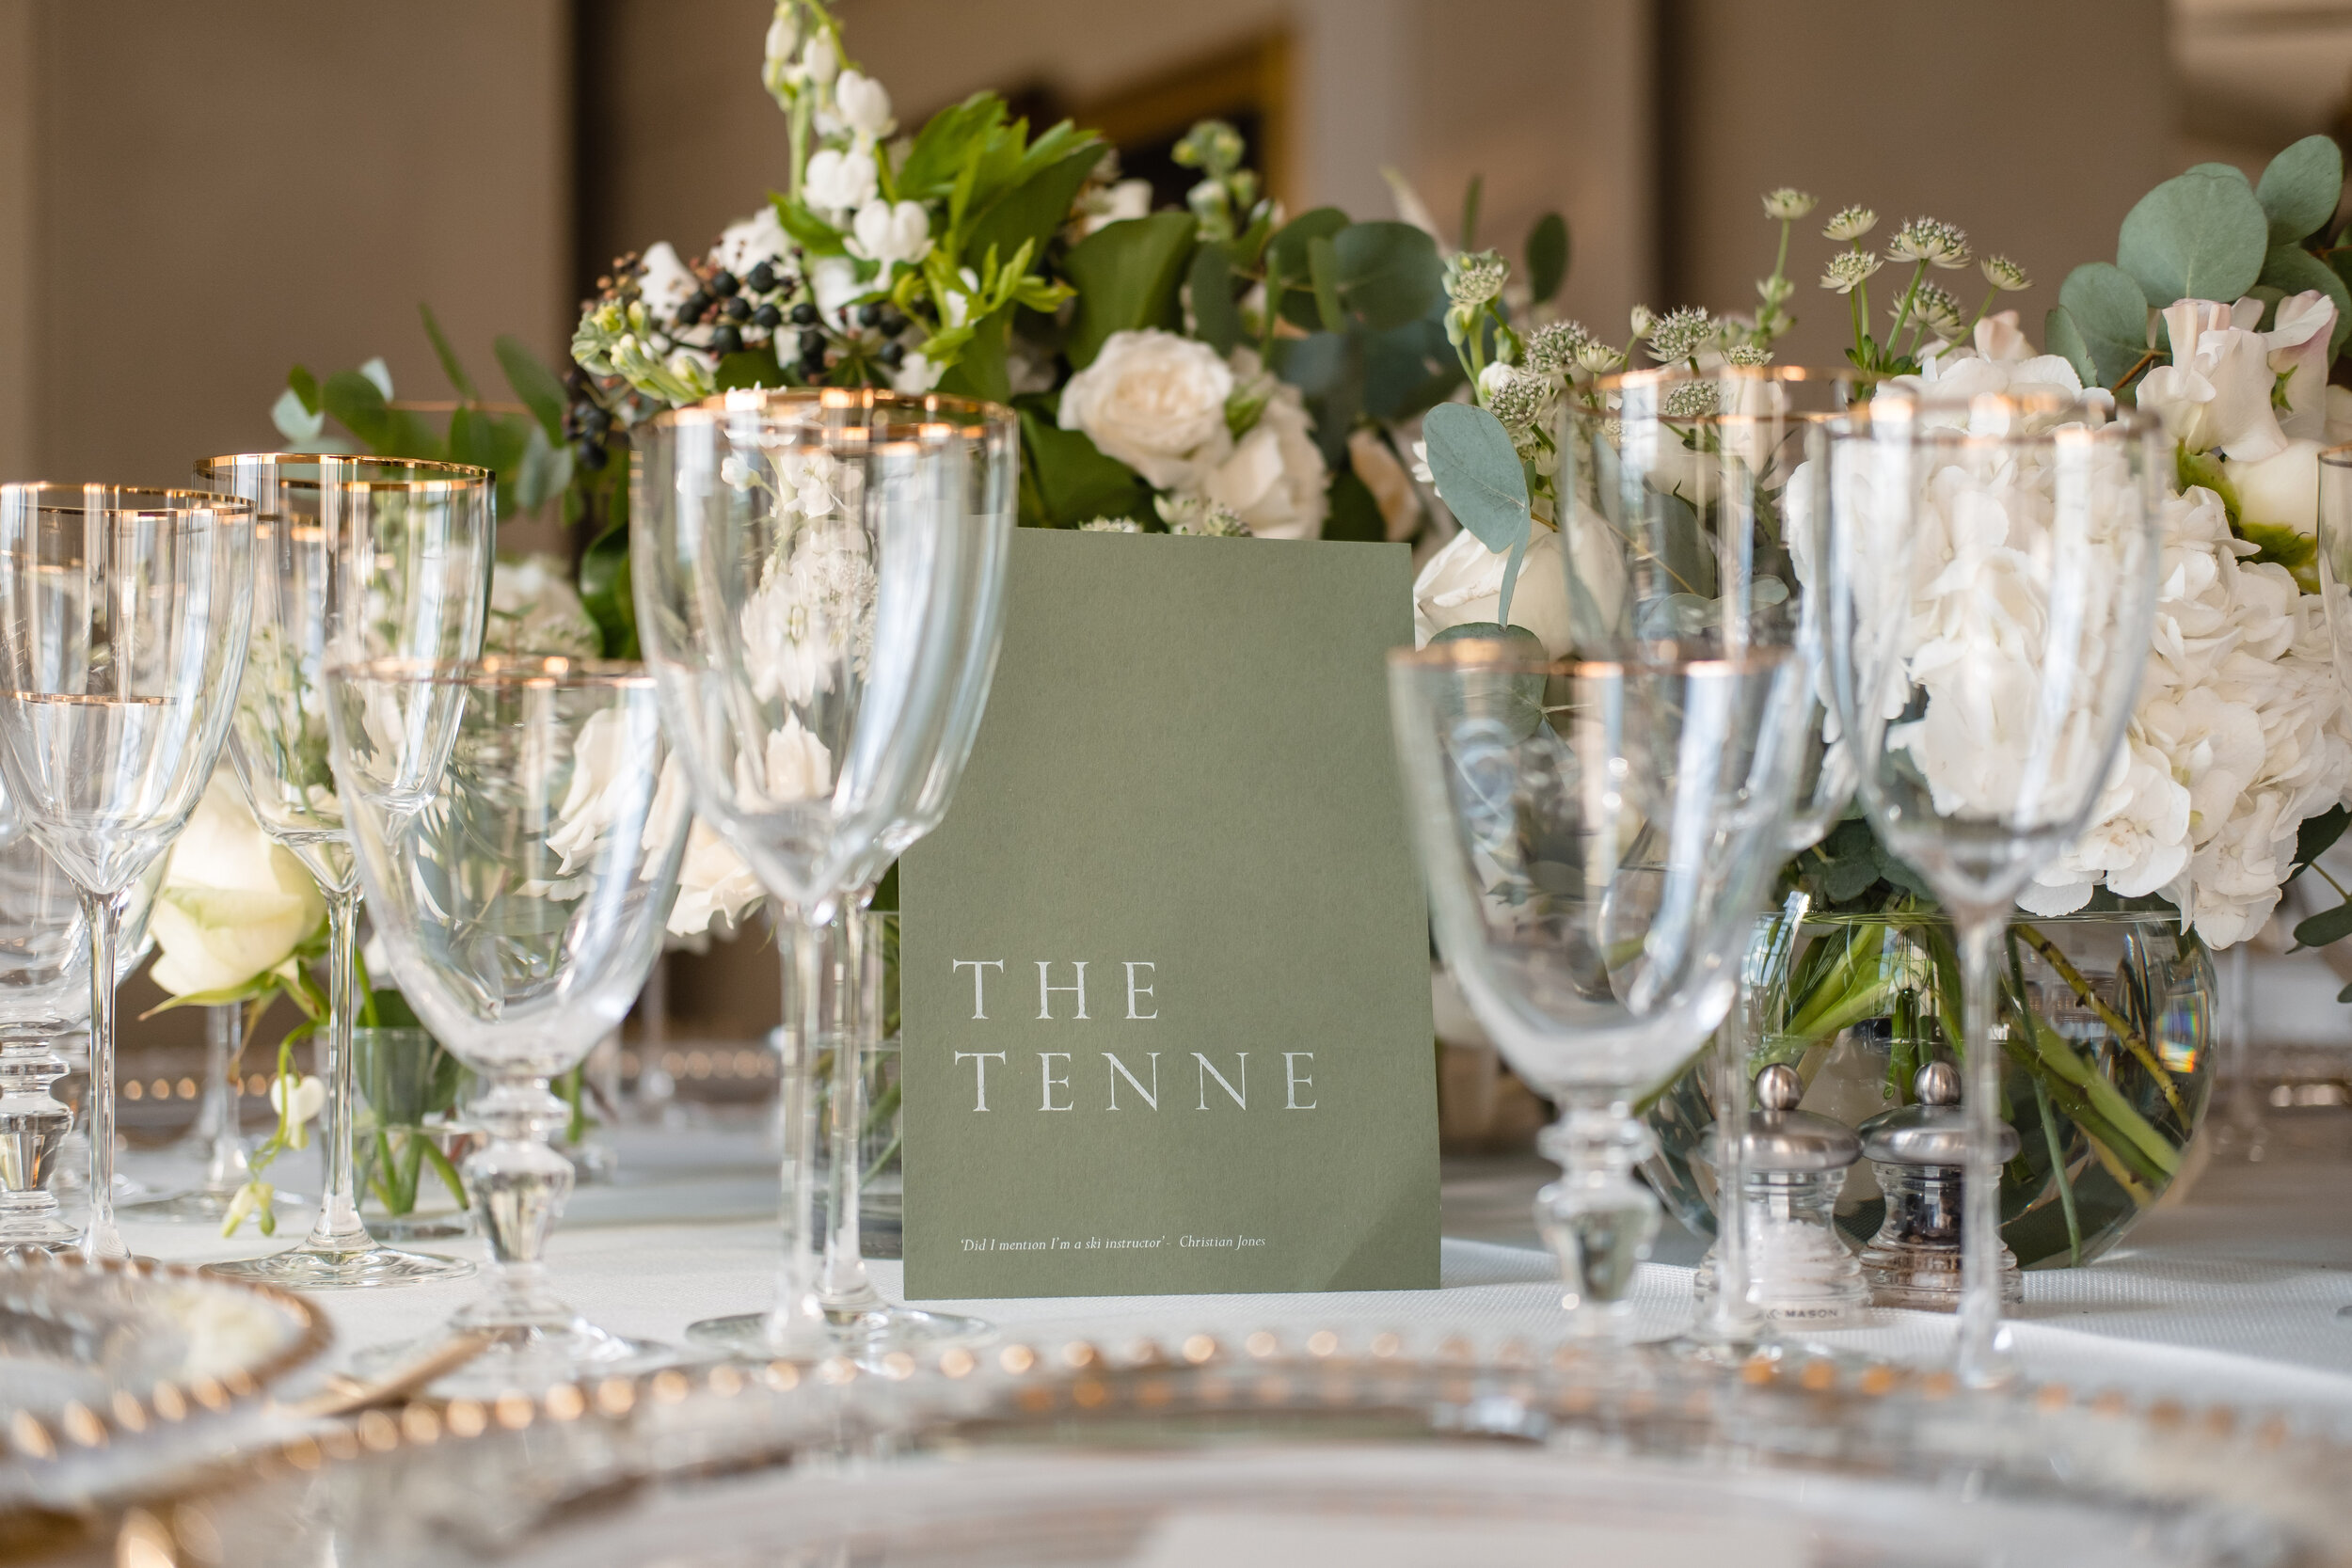 gold rimmed glassware on a table set for a wedding breakfast